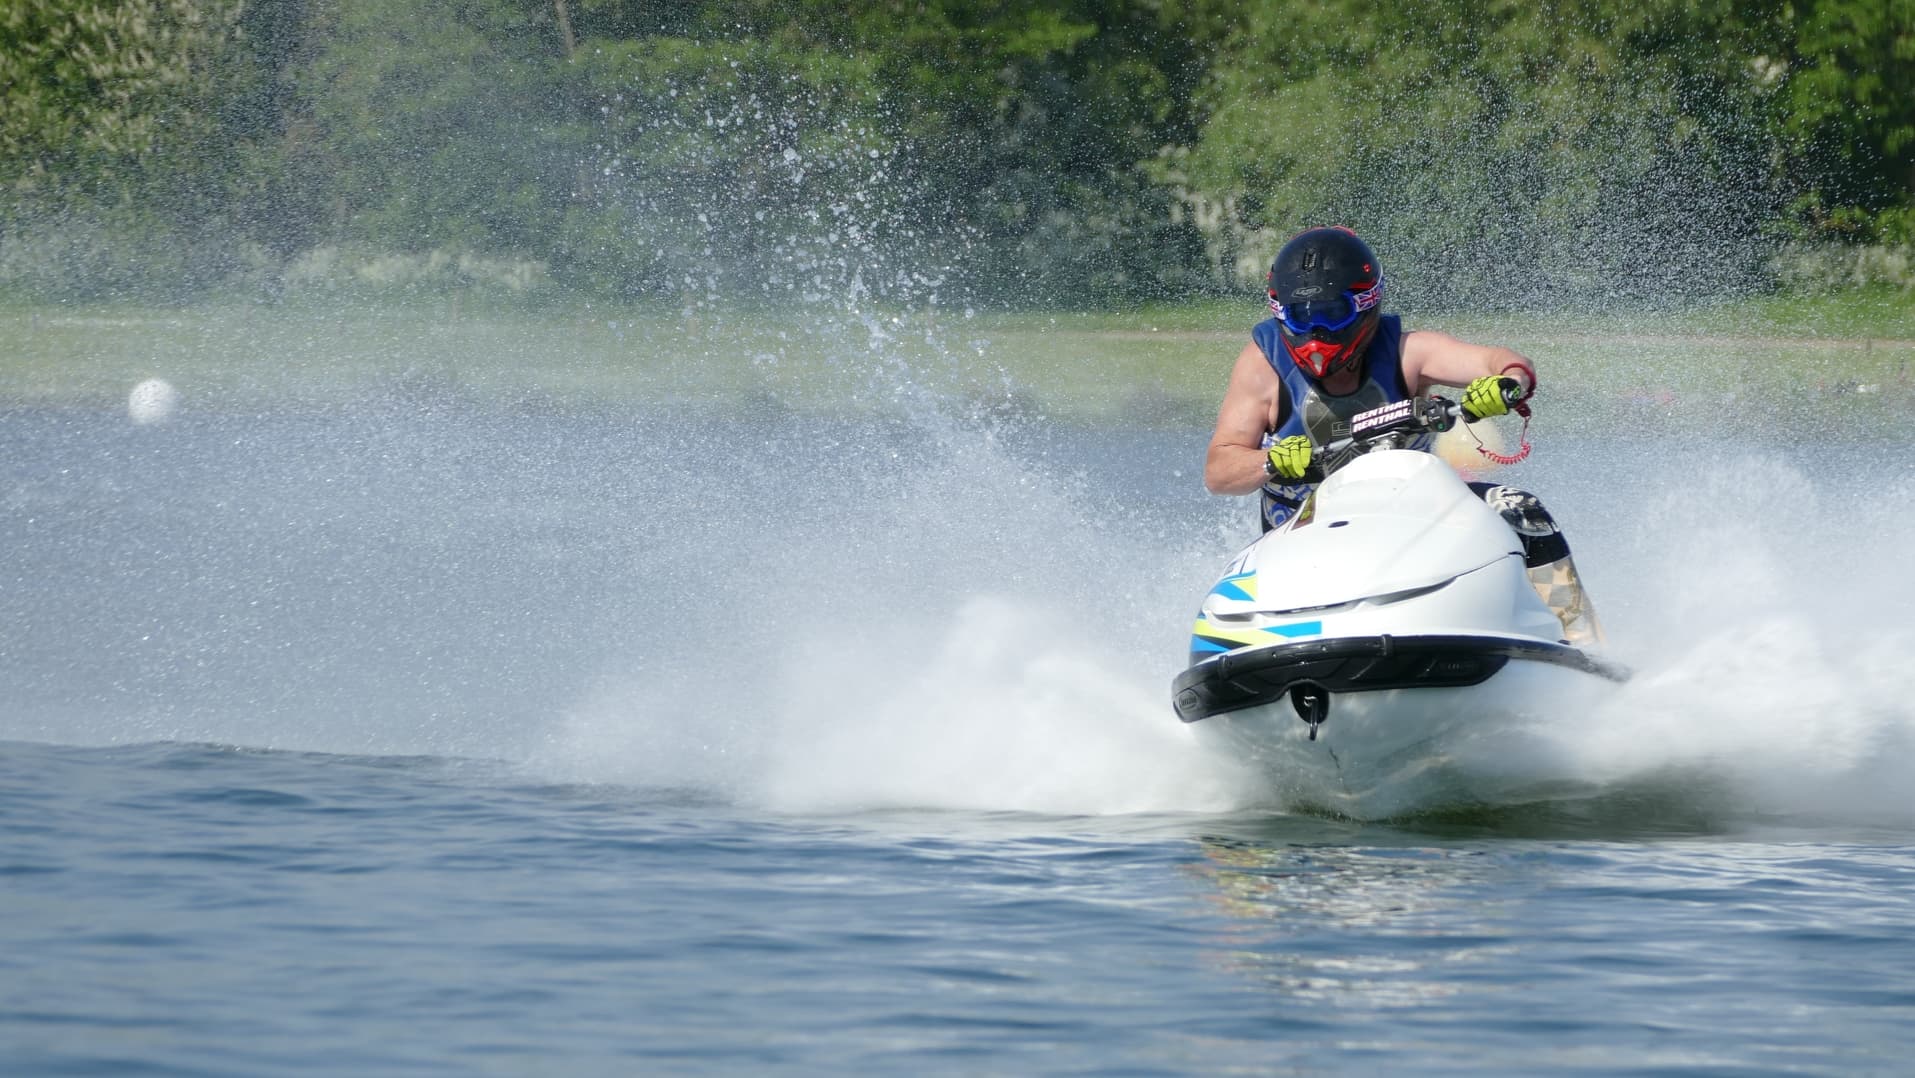 How to Tune a Jet Ski?